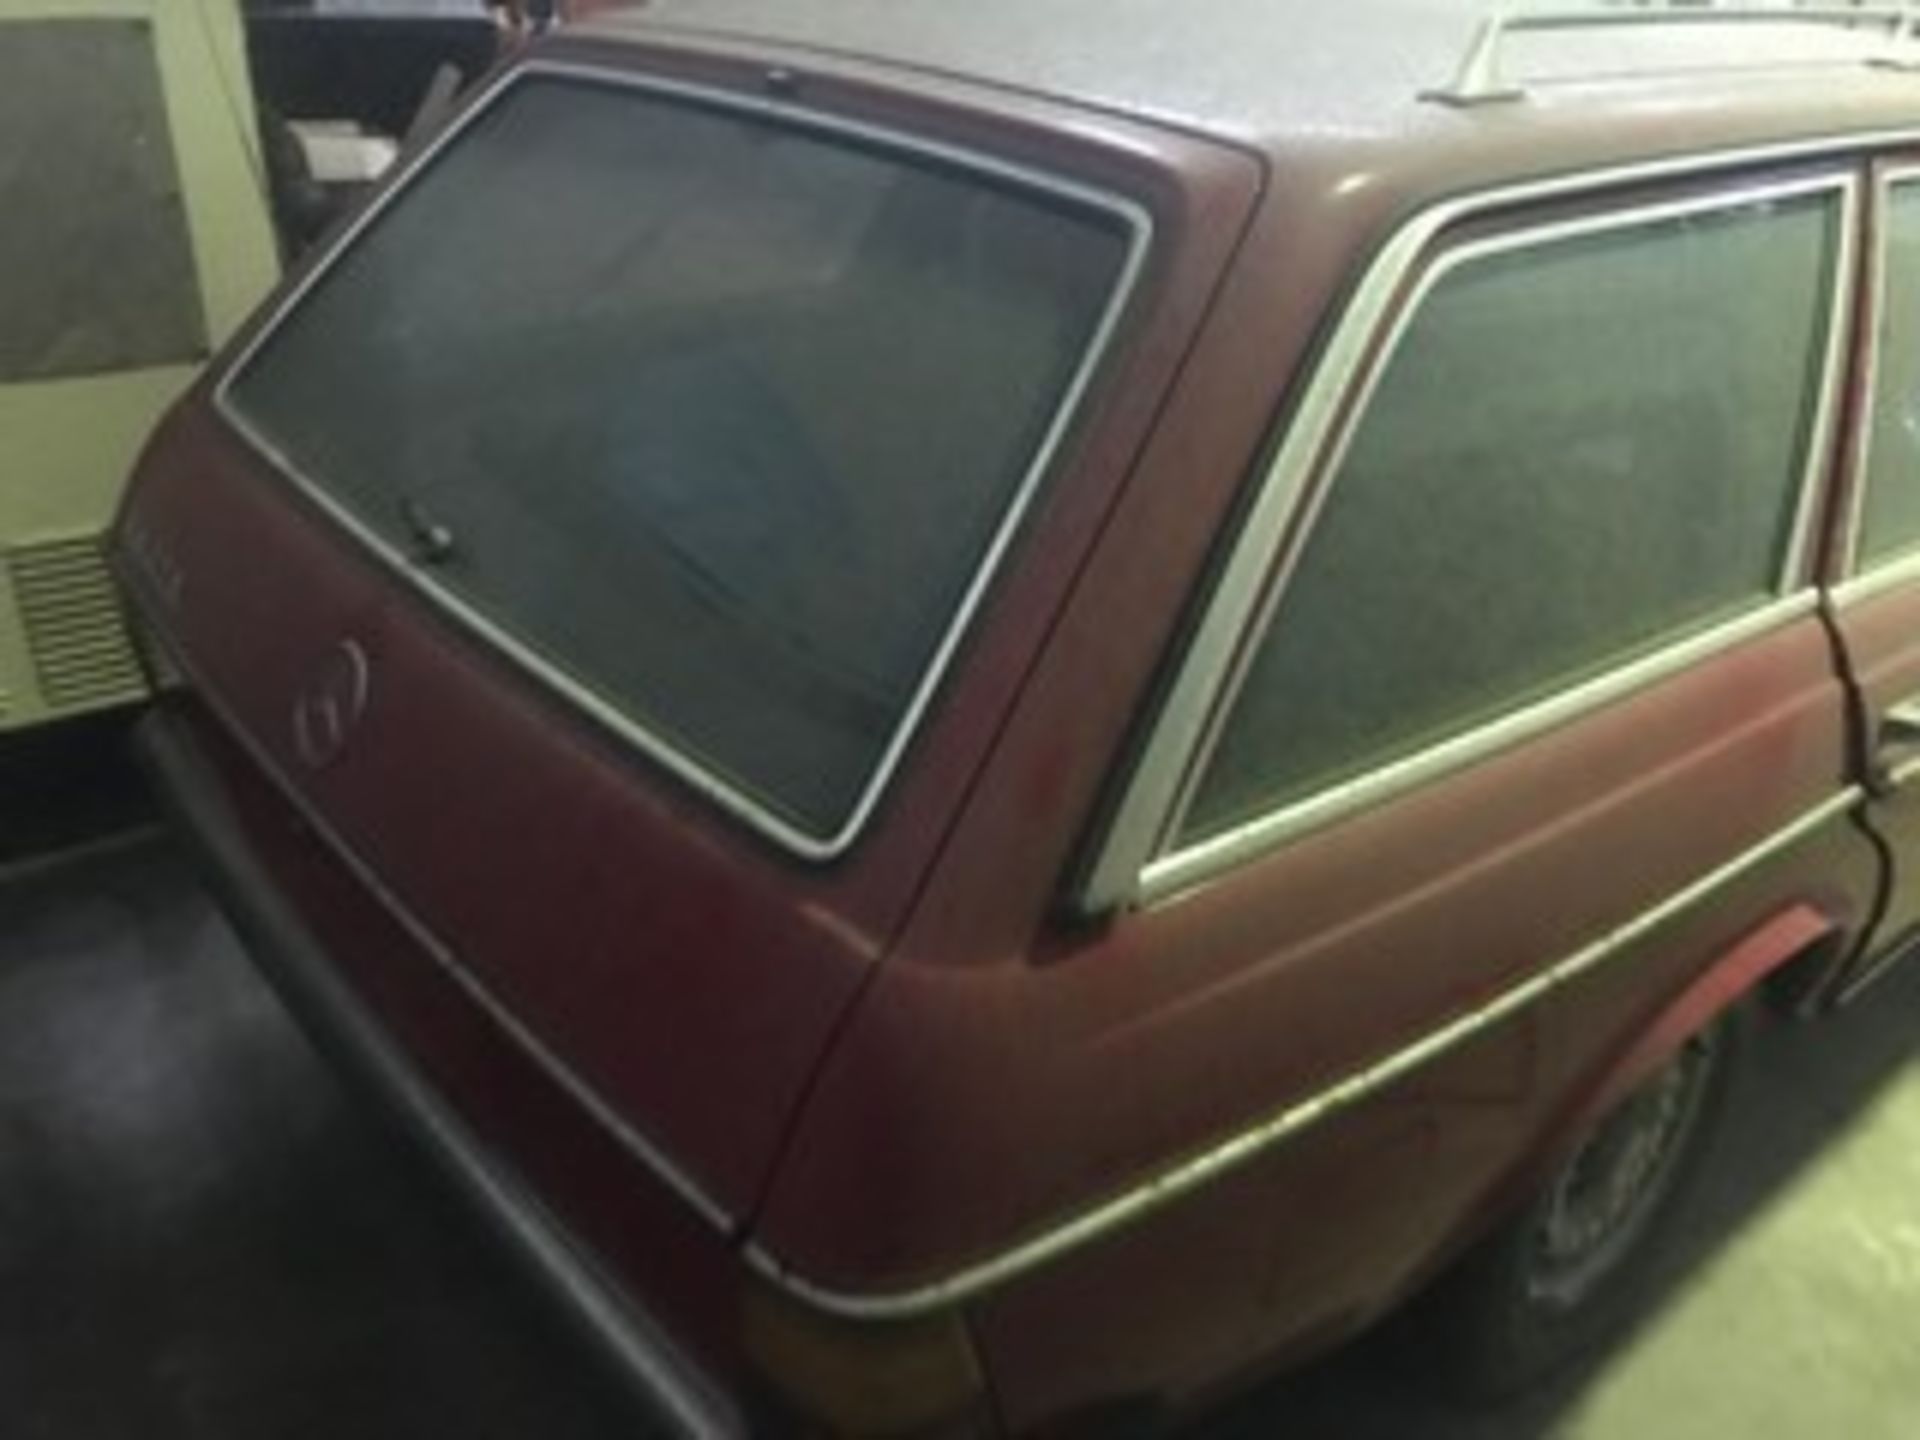 1984 MERCEDES 280TE STATION WAGON - VIN #WDB1230931F023392 - RED - Image 6 of 7